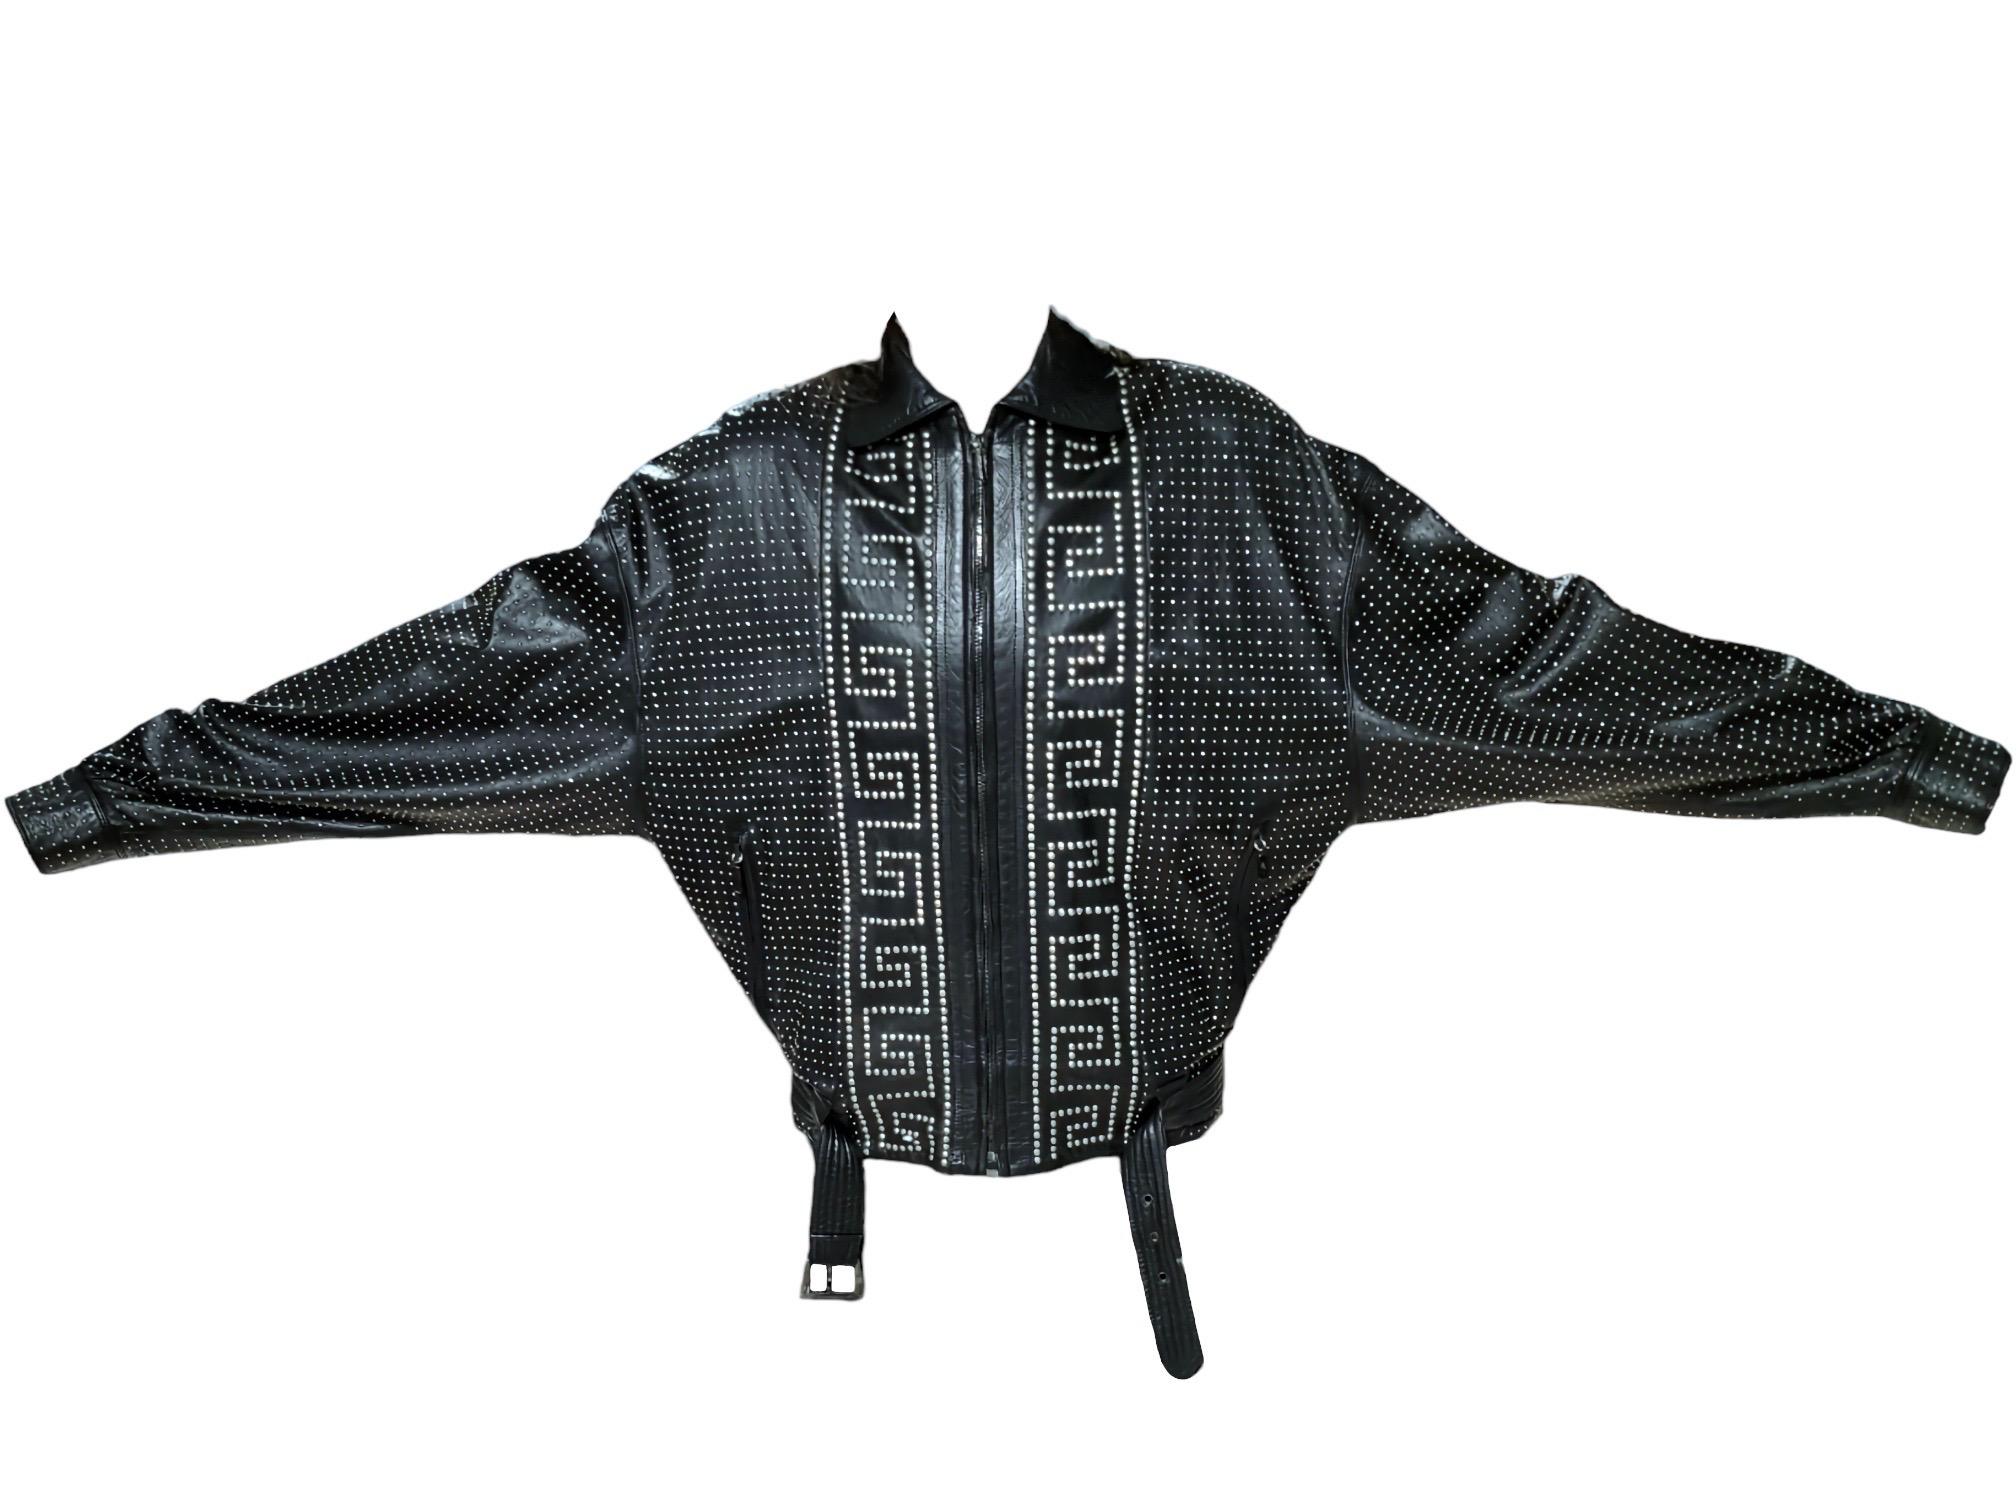 Gianni Versace Greek Key Studded Leather Jacket seen on the Men's Runway from the Spring Summer 1992 Collection.

This extraordinary bomber style leather jacket boasts a captivating array of studs, crafting a mesmerizing visual illusion that exudes